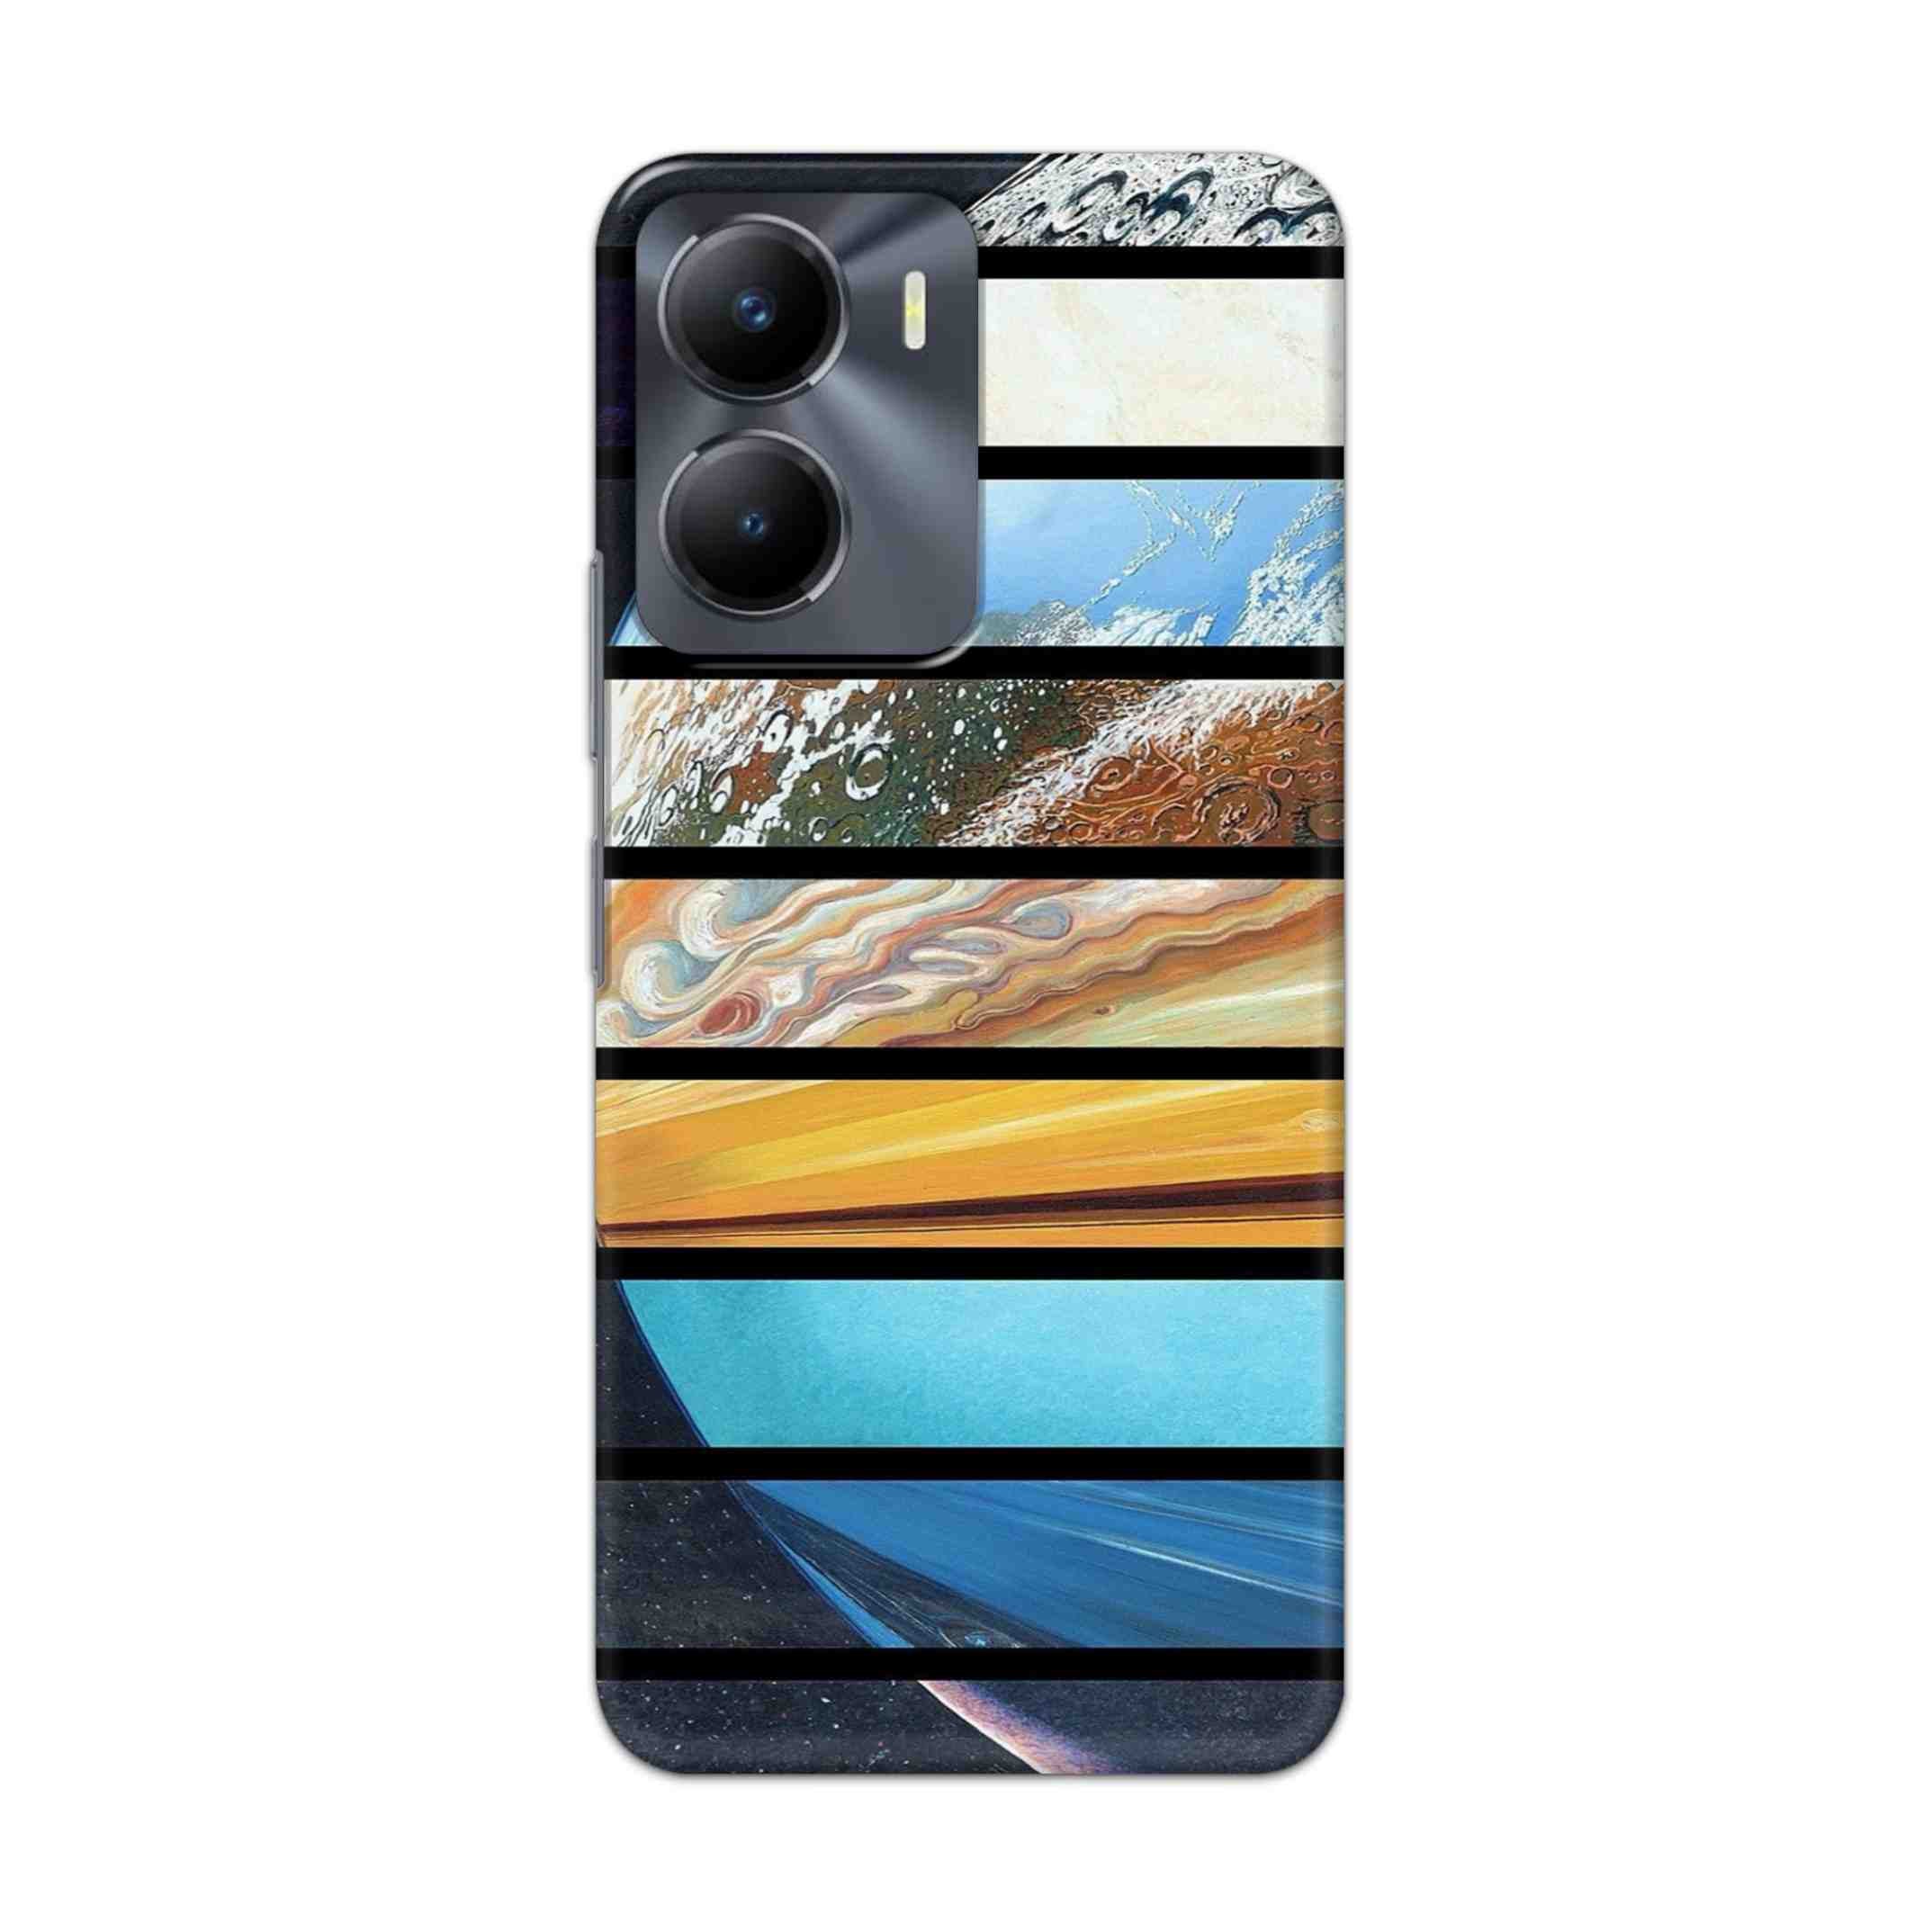 Buy Colourful Earth Hard Back Mobile Phone Case Cover For Vivo Y56 Online